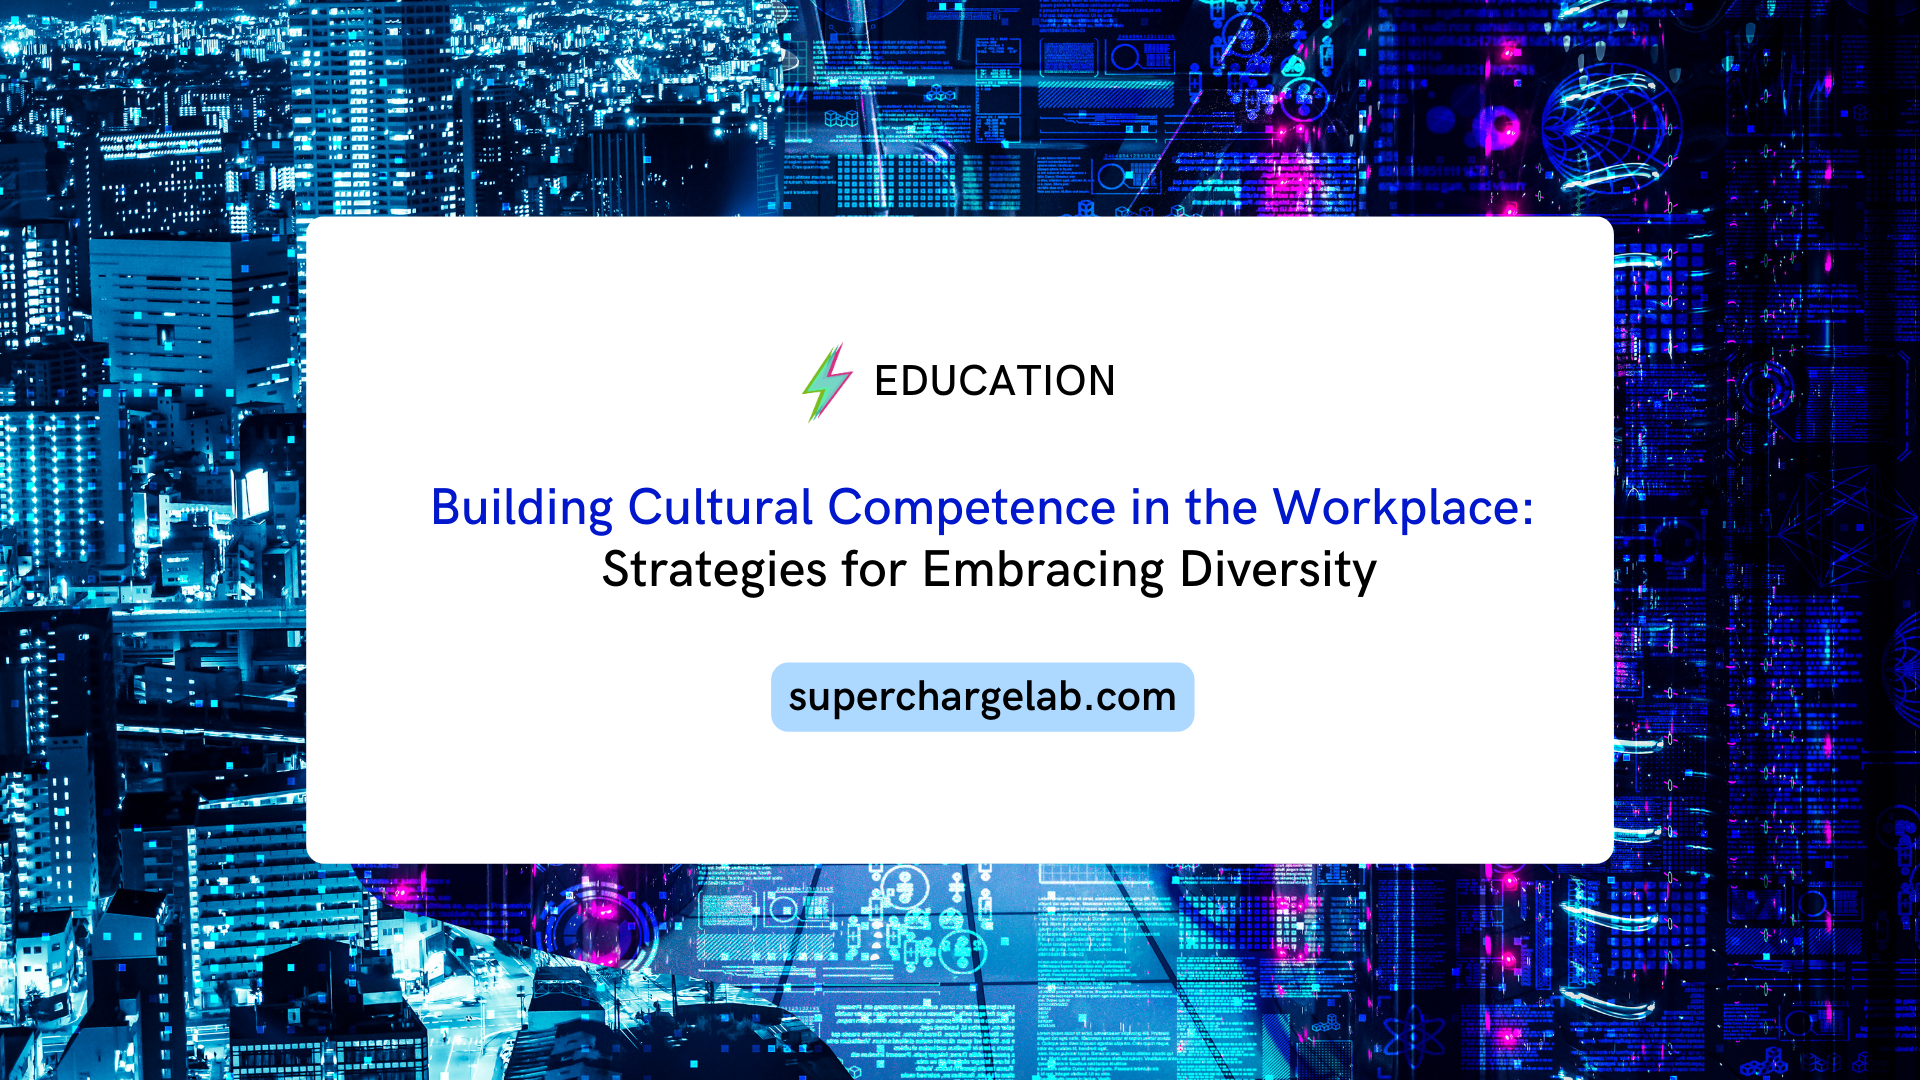 Building Cultural Competence in the Workplace: Strategies for Embracing Diversity